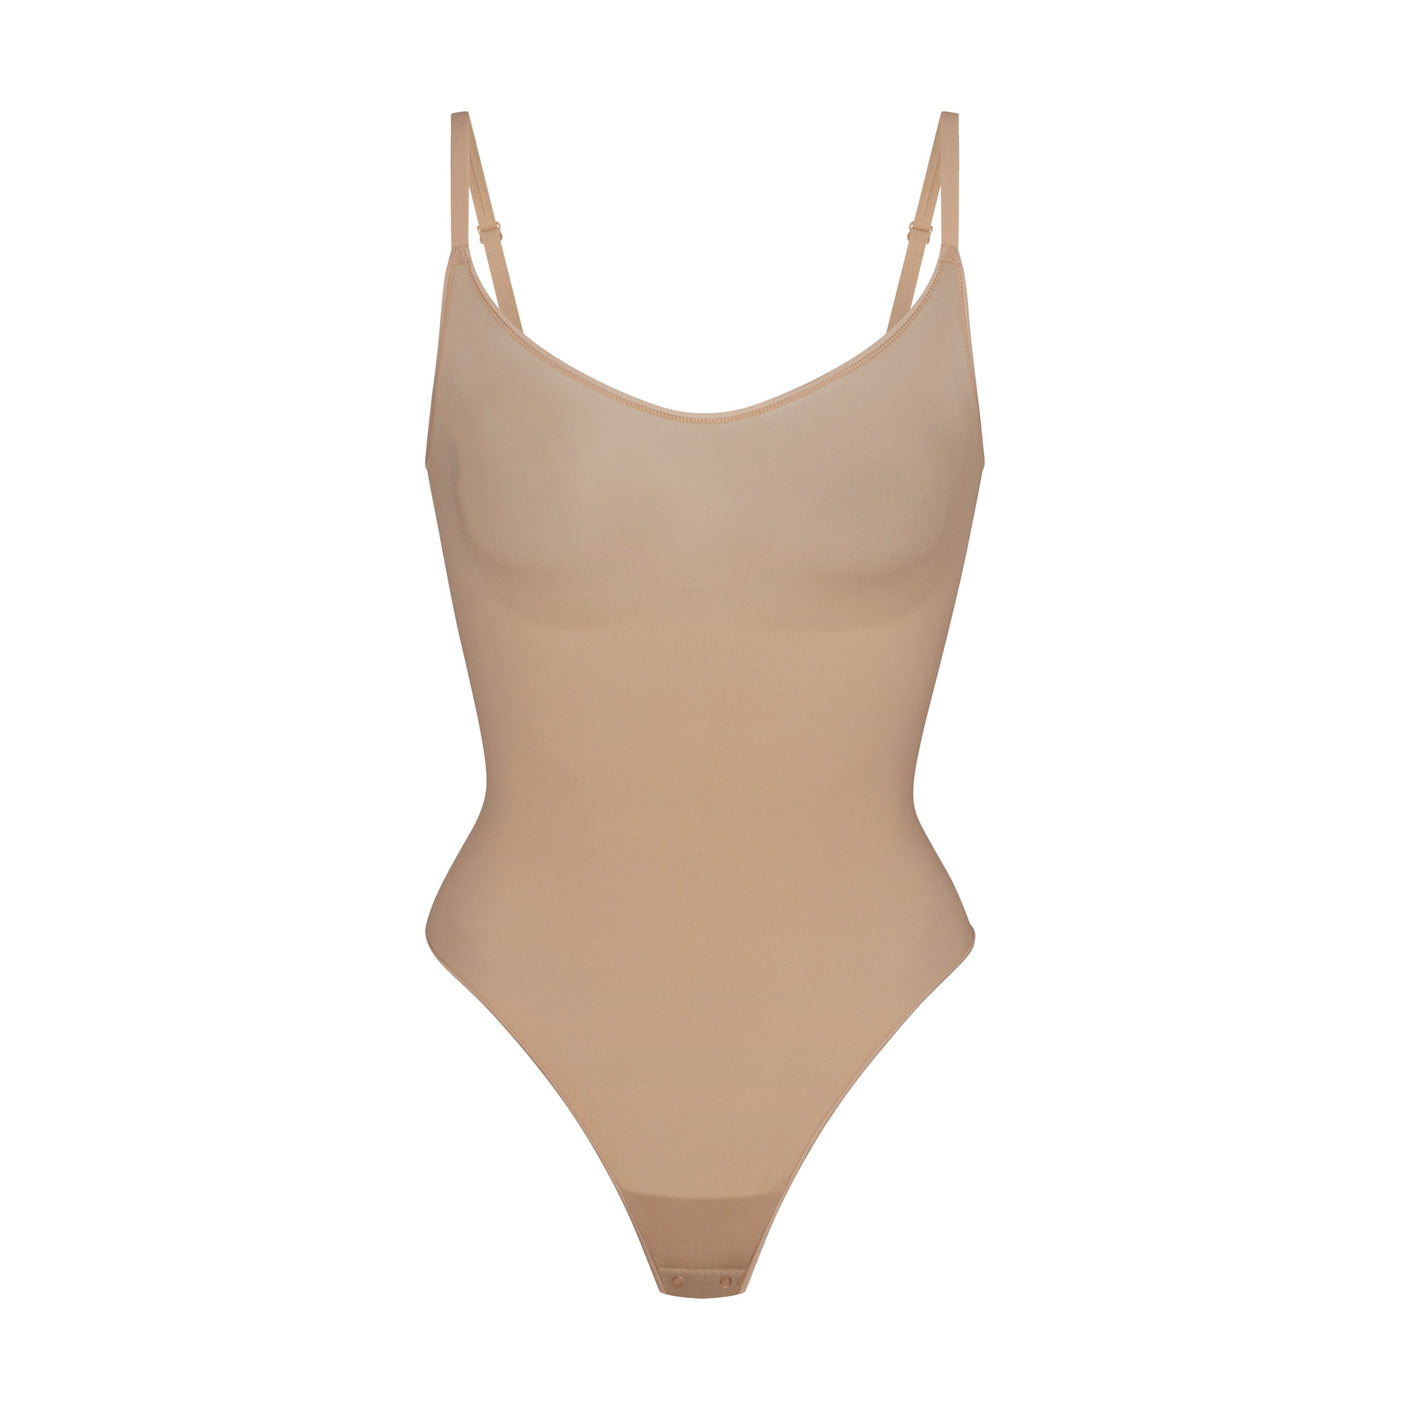 Seamless Barely There Brief Bodysuit